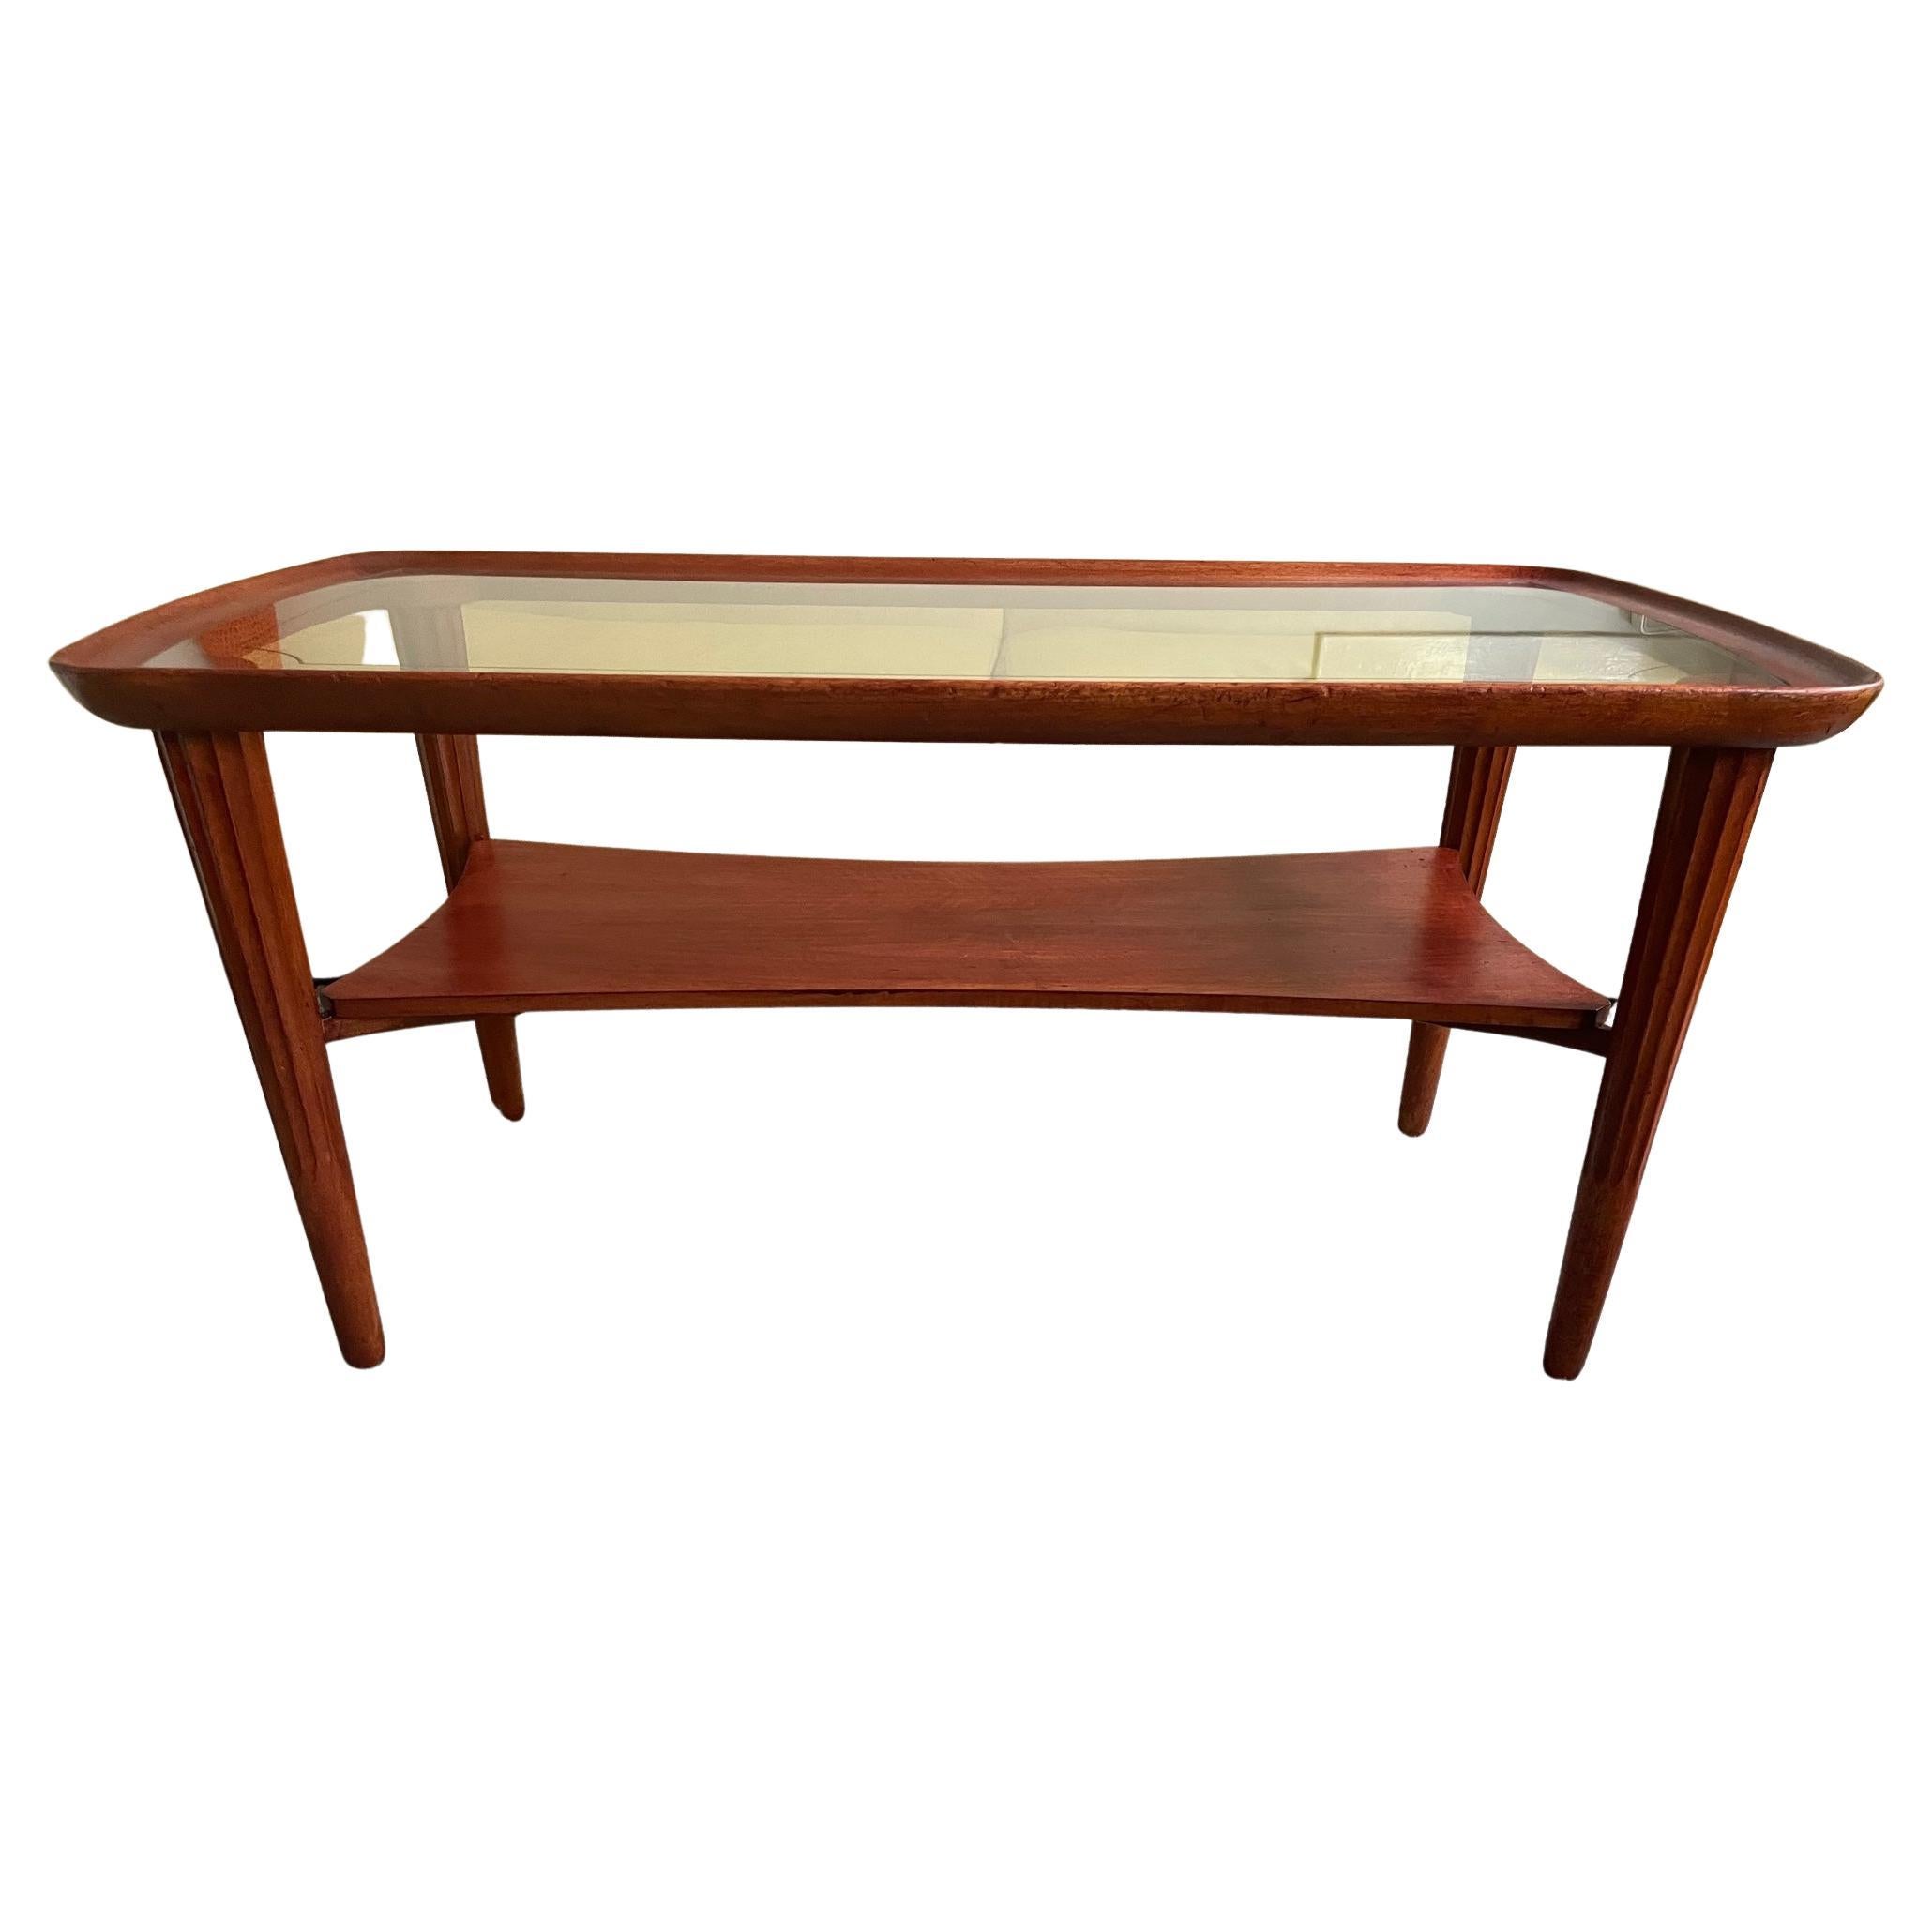 Art deco coffee table. Beautiful wooden table. 1950's Golden strip in glass